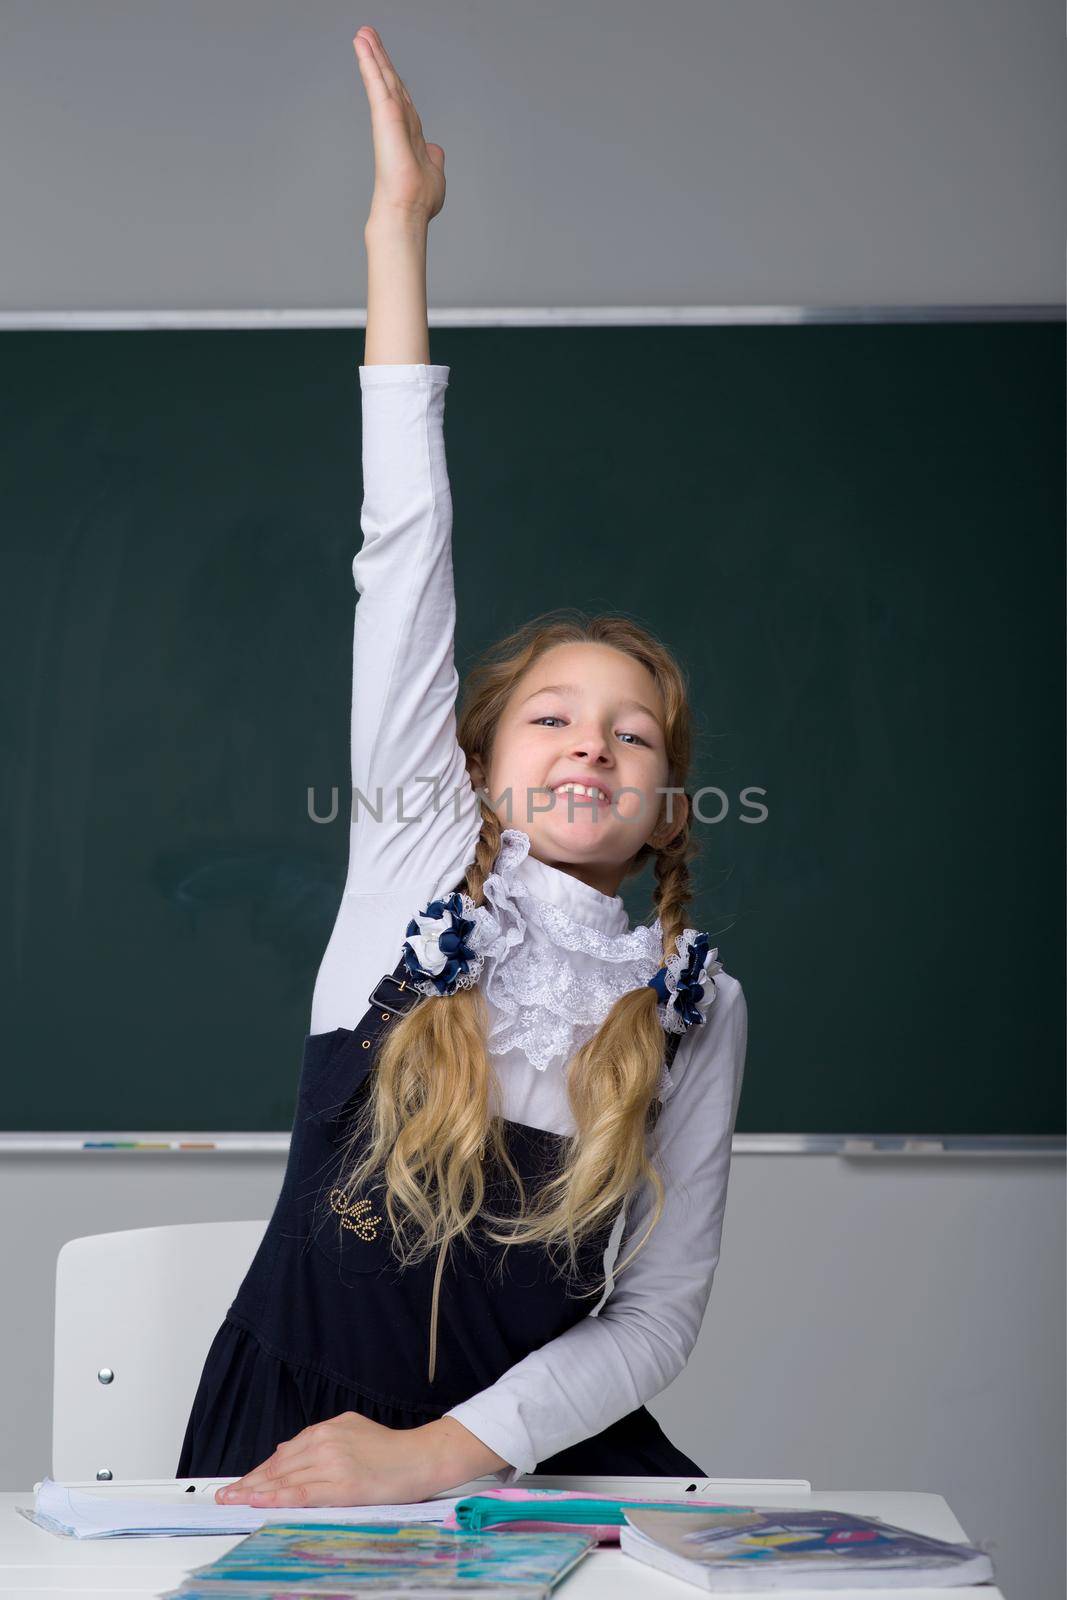 Schoolgirl learning in classroom. Smiling girl in uniform rising her hand up to answer the teacher. Primary school student sitting on background of blackboard. Back to school, education concept